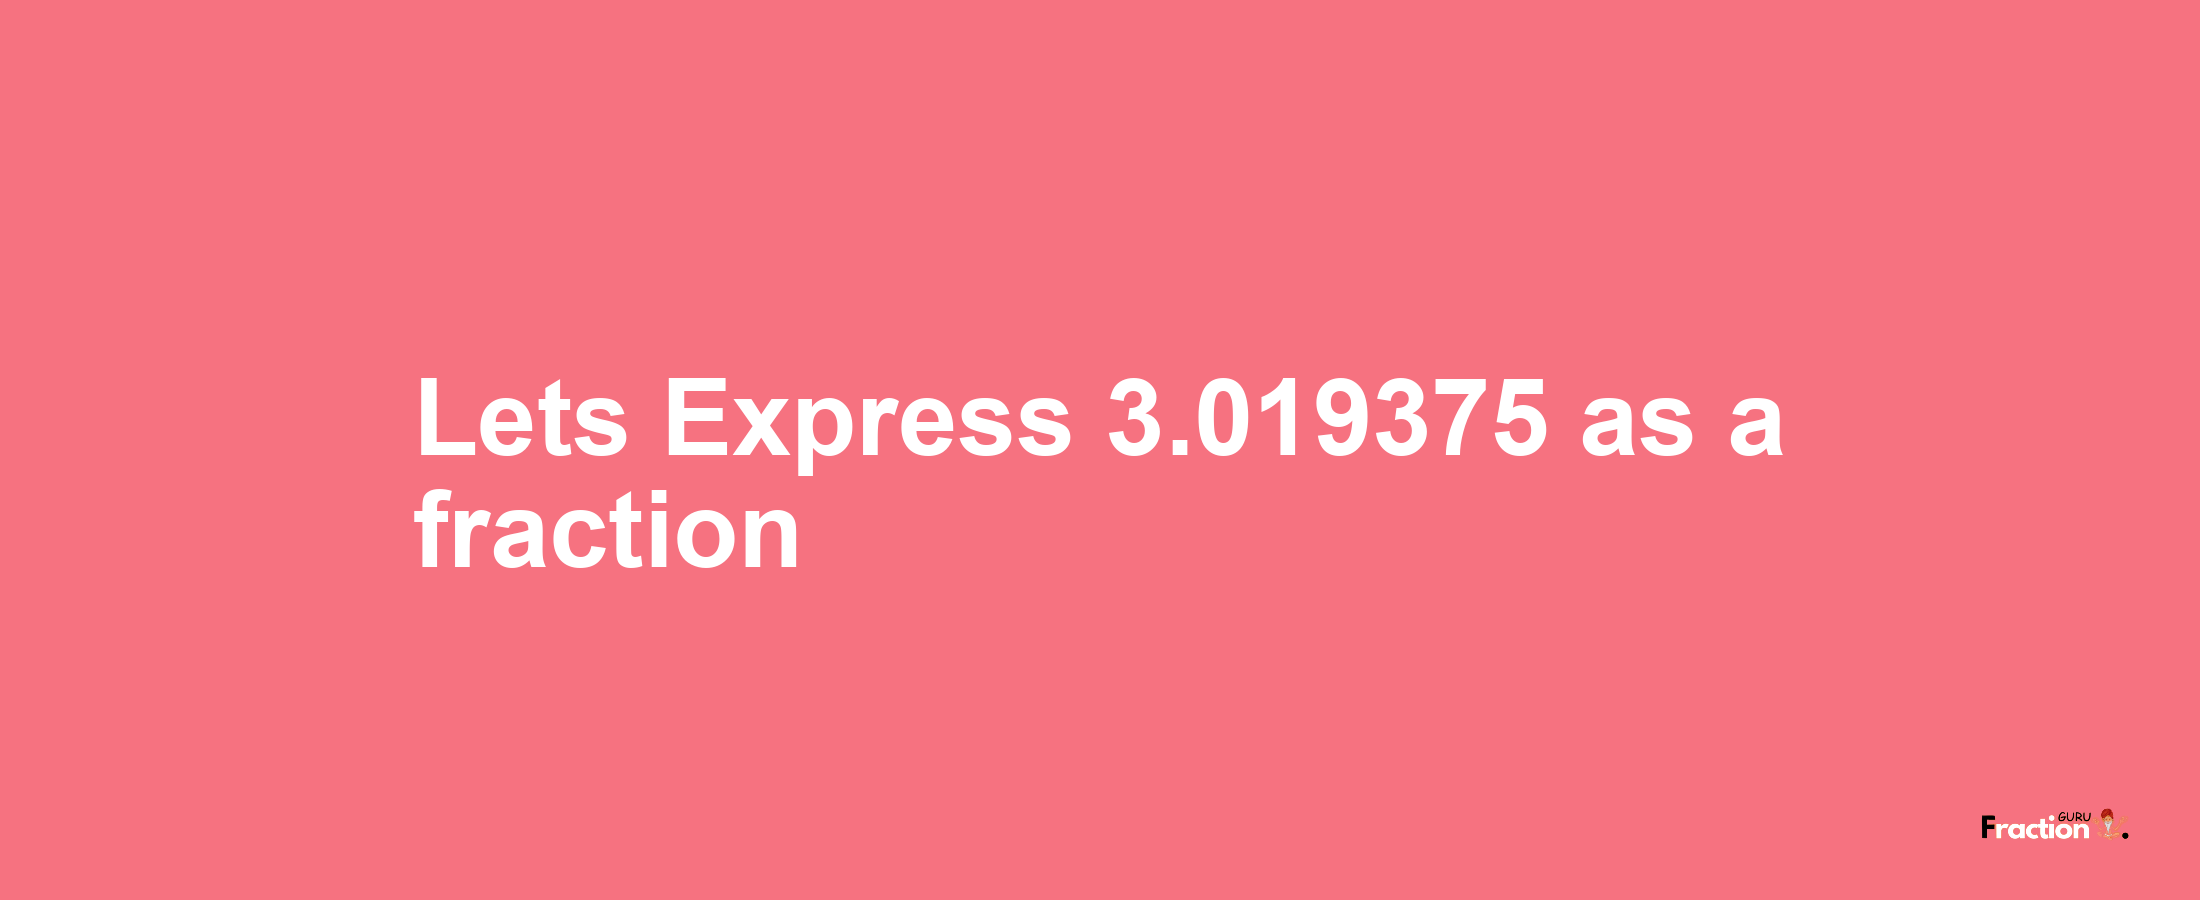 Lets Express 3.019375 as afraction